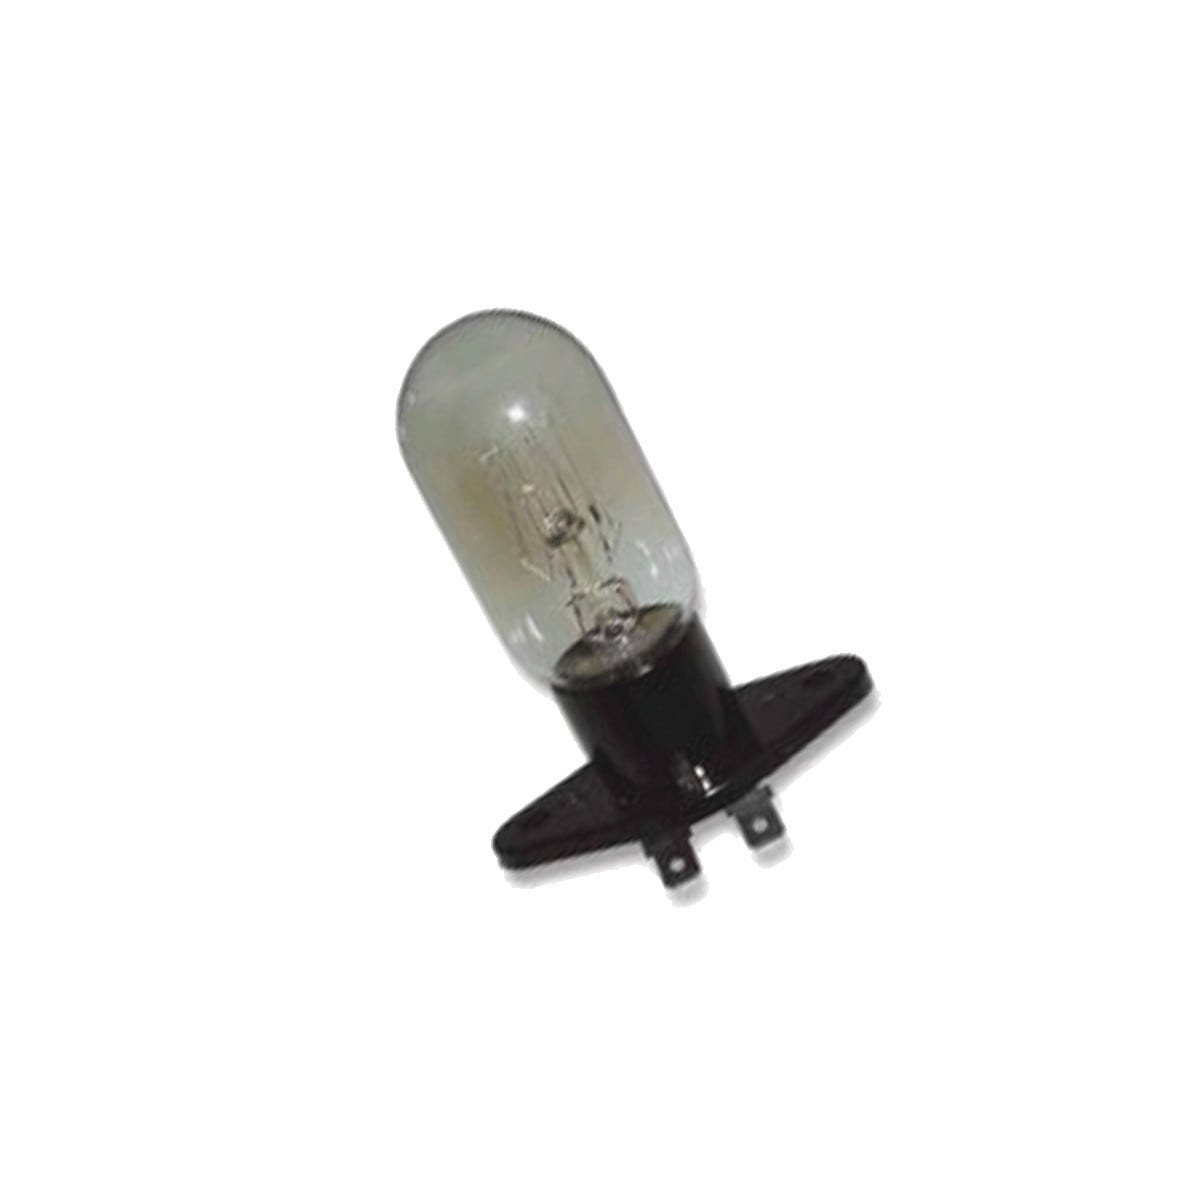 Lampe (25W 240V) pour e.a. Whirlpool micro ondes 481213488071